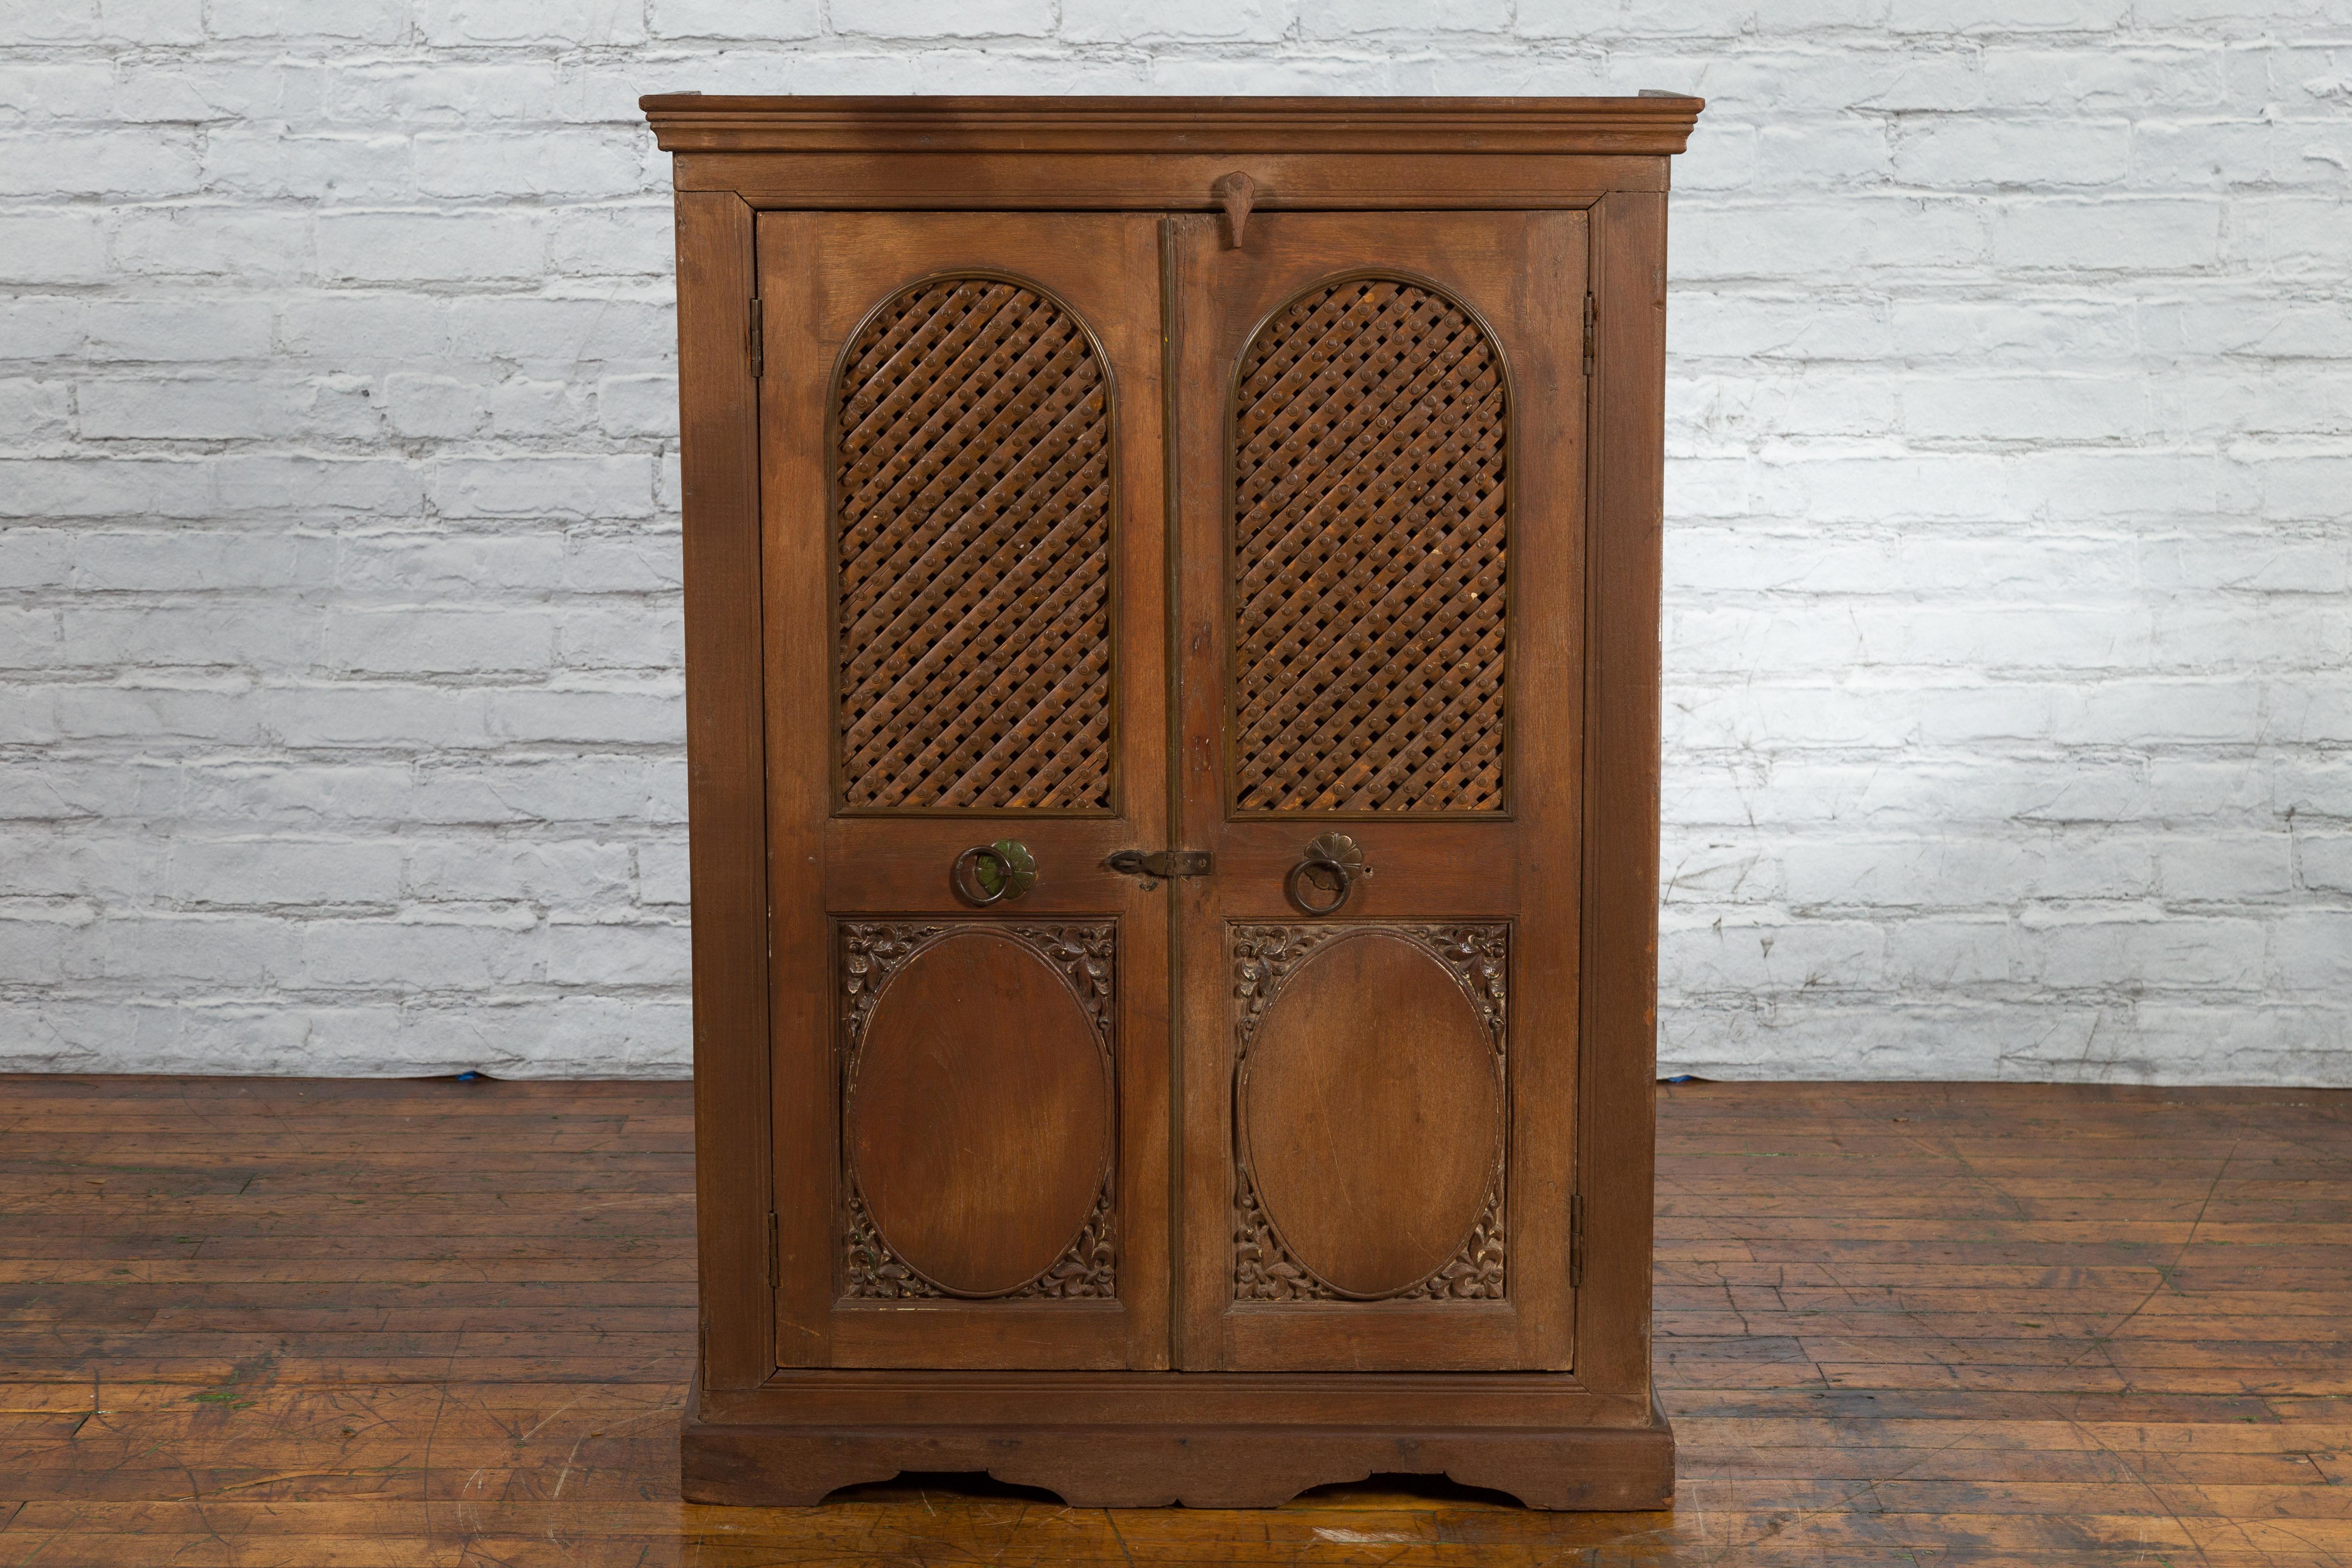 Indian Vintage Wooden Cabinet with Lattice Motifs and Carved Panels In Good Condition For Sale In Yonkers, NY